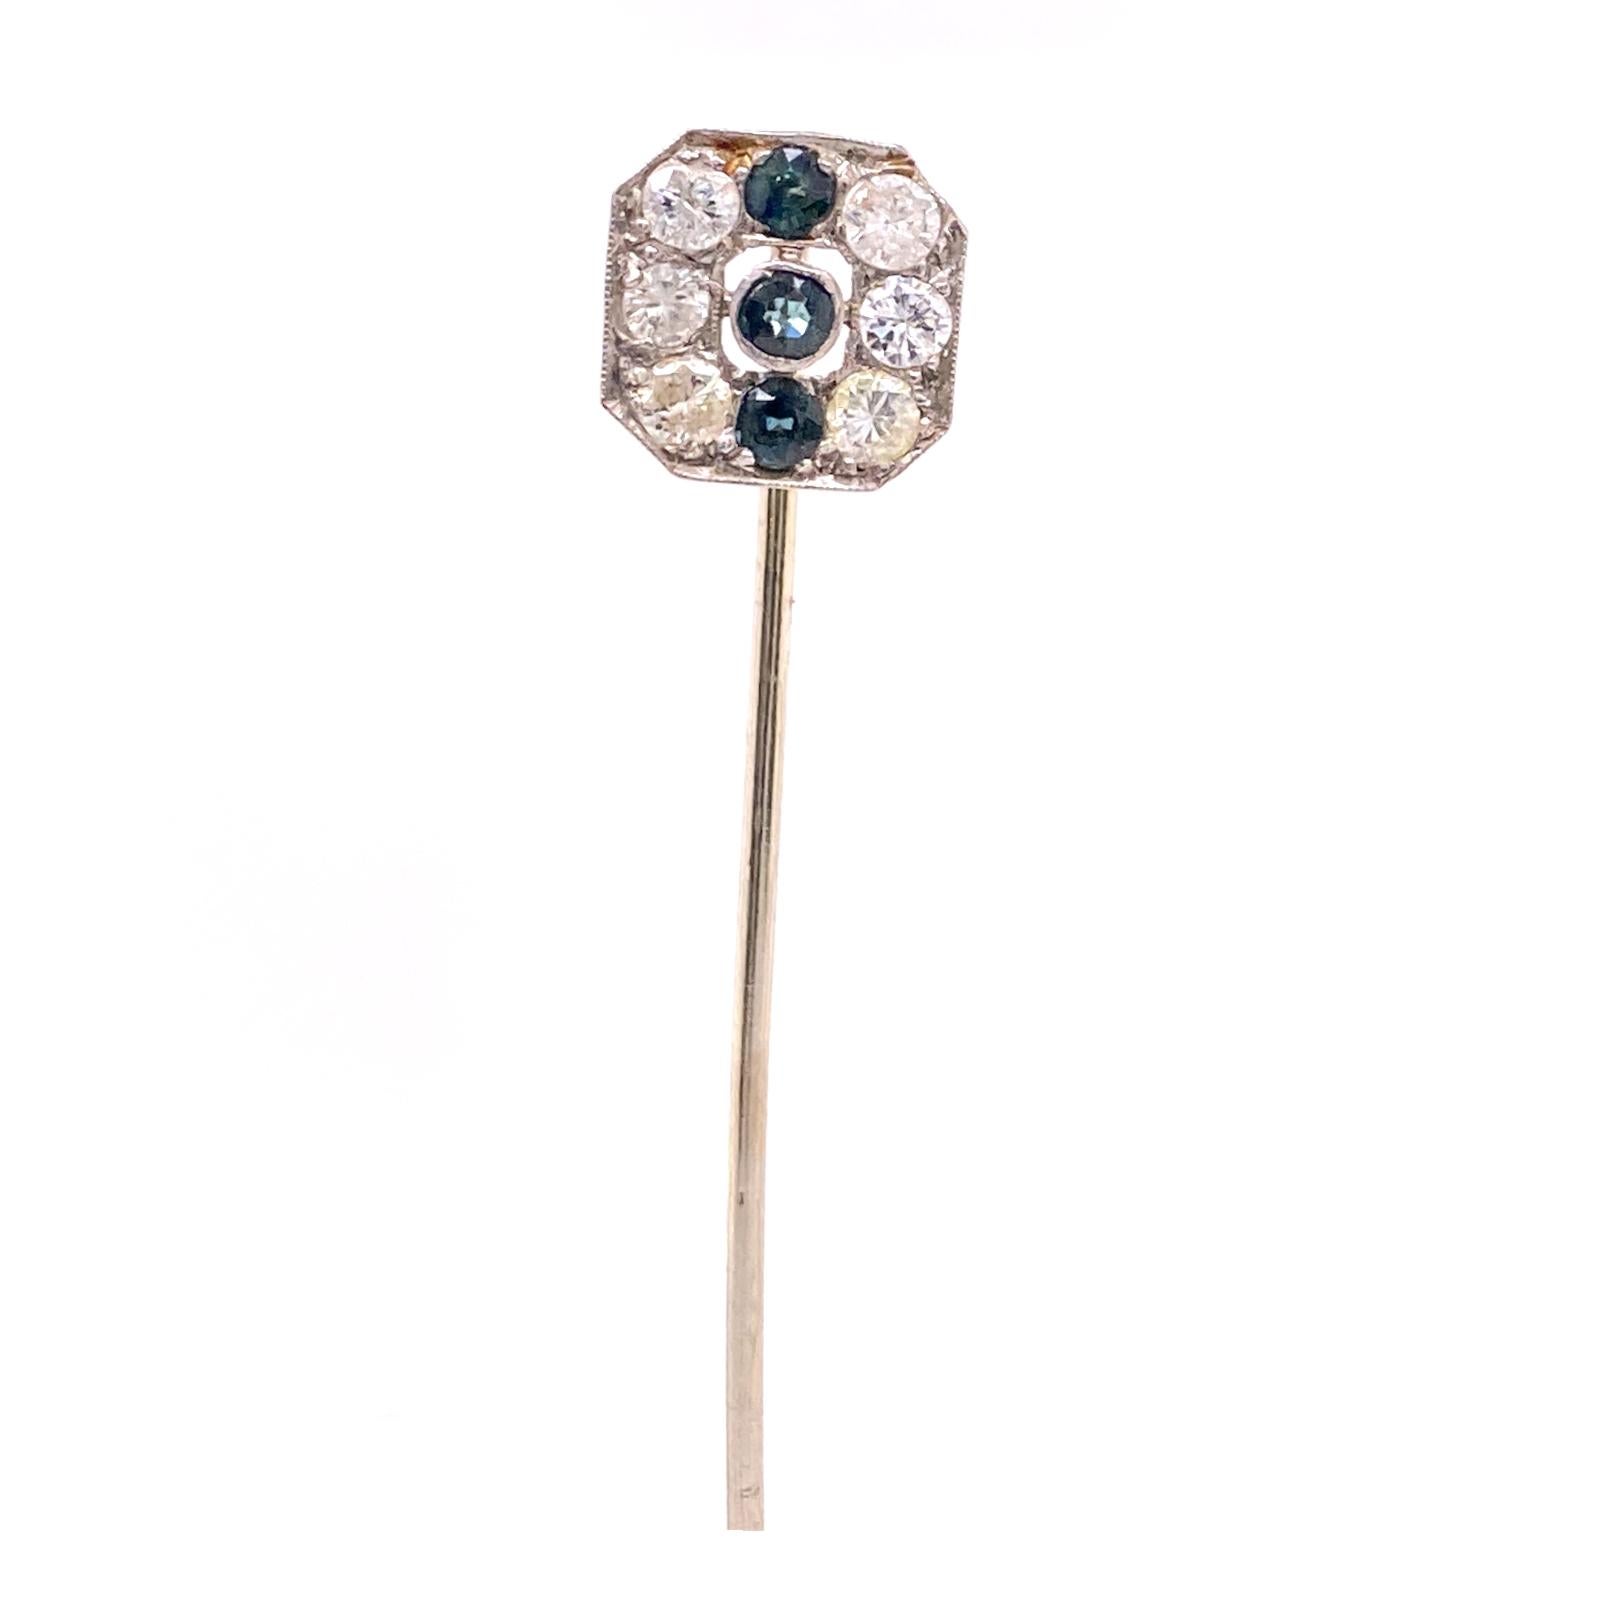 Original Art Deco stick pin handmade in platinum and yellow gold. The 6 Old Mine cut diamonds weigh approximately .70 carat total weight and graded H-I color and SI clarity. I am assuming the sapphires are synthetic hence the time period, but they